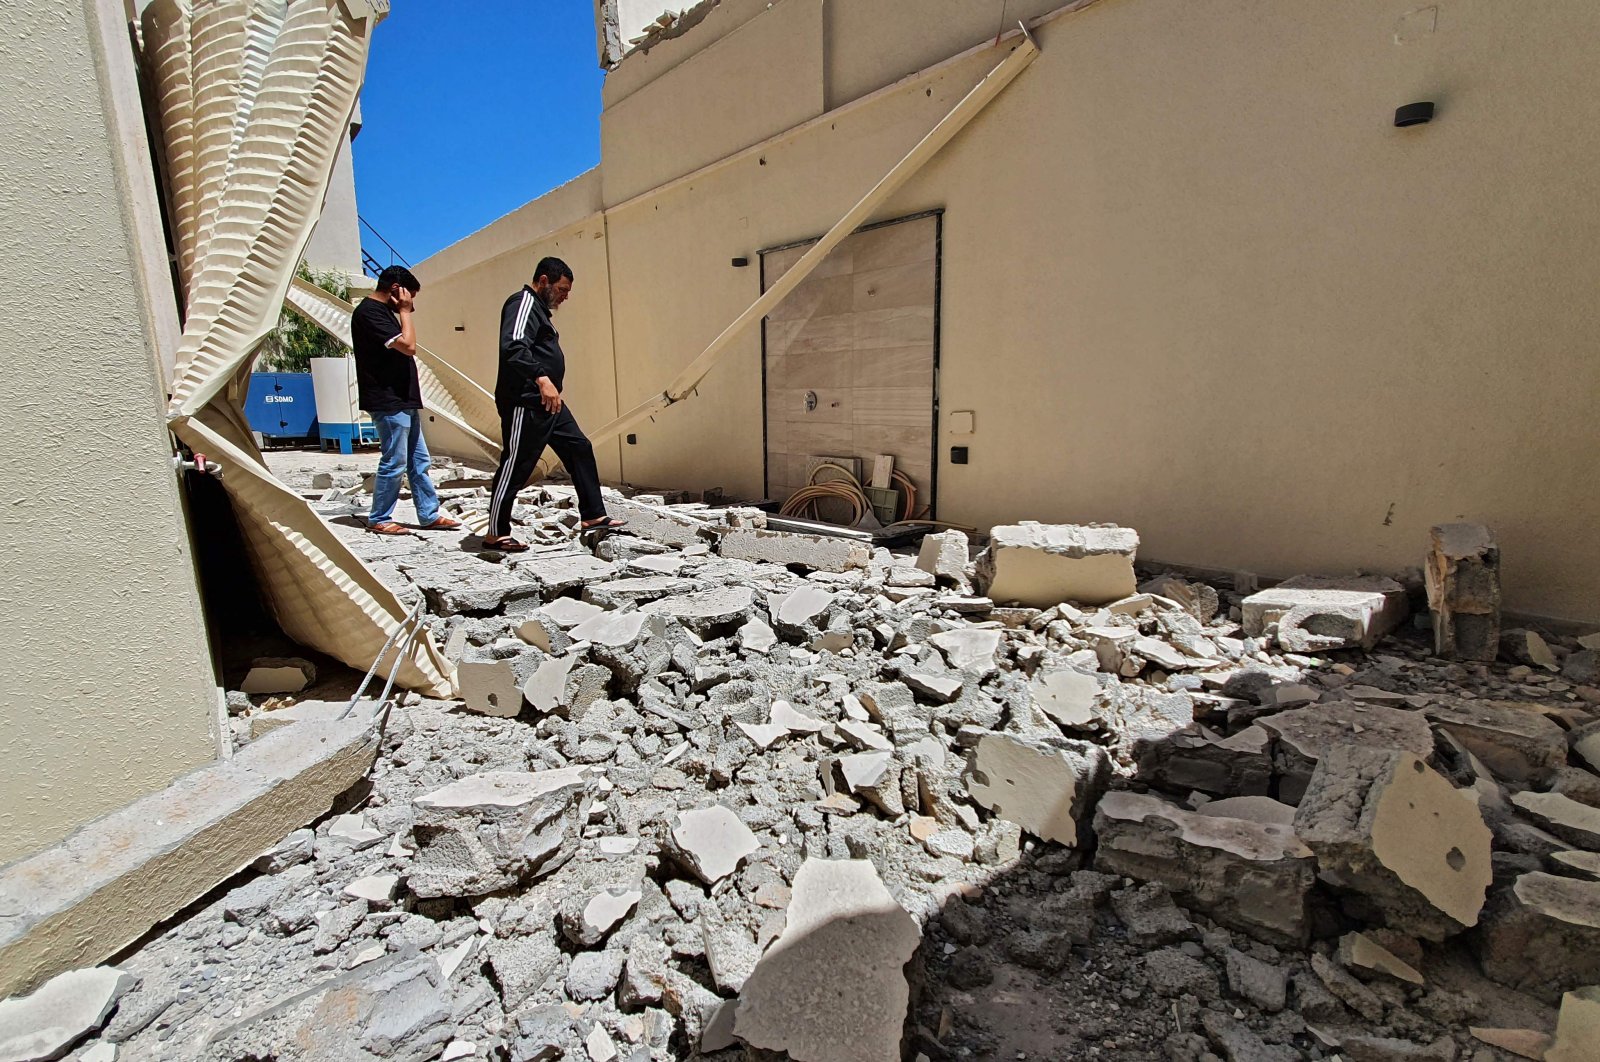 Residents walk amid the rubble of a building damaged when forces loyal to eastern-based warlord Khalifa Haftar shelled the residential neighborhood of Znatah in the Libyan capital Tripoli, held by the U.N.recognized Government of National Accord (GNA), May 1, 2020. (AFP Photo)